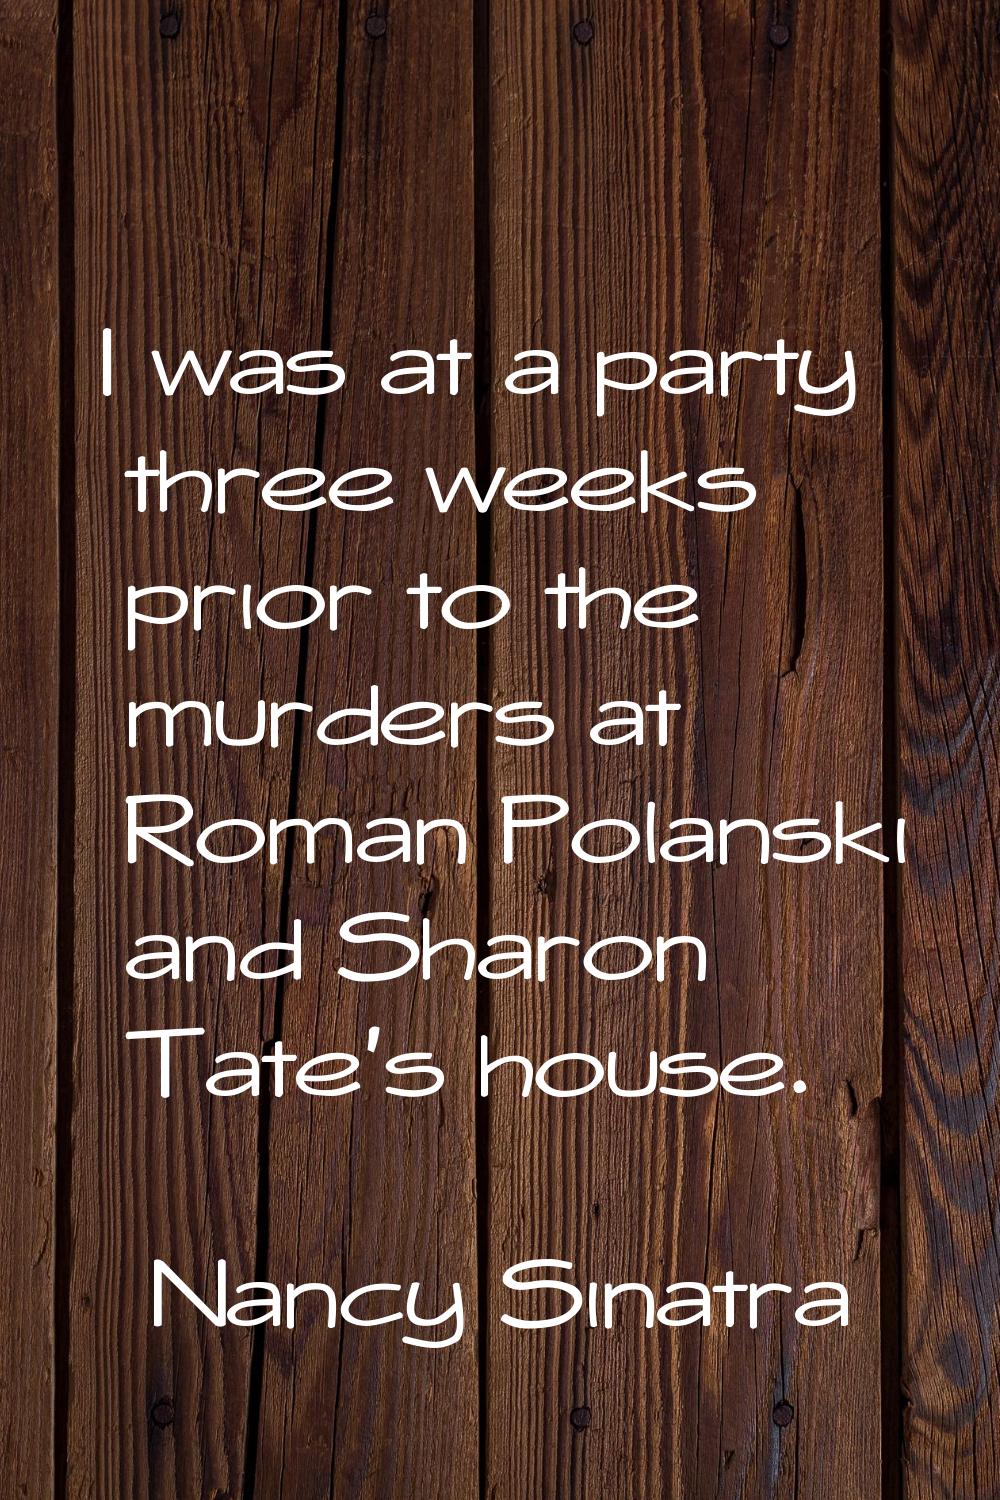 I was at a party three weeks prior to the murders at Roman Polanski and Sharon Tate's house.